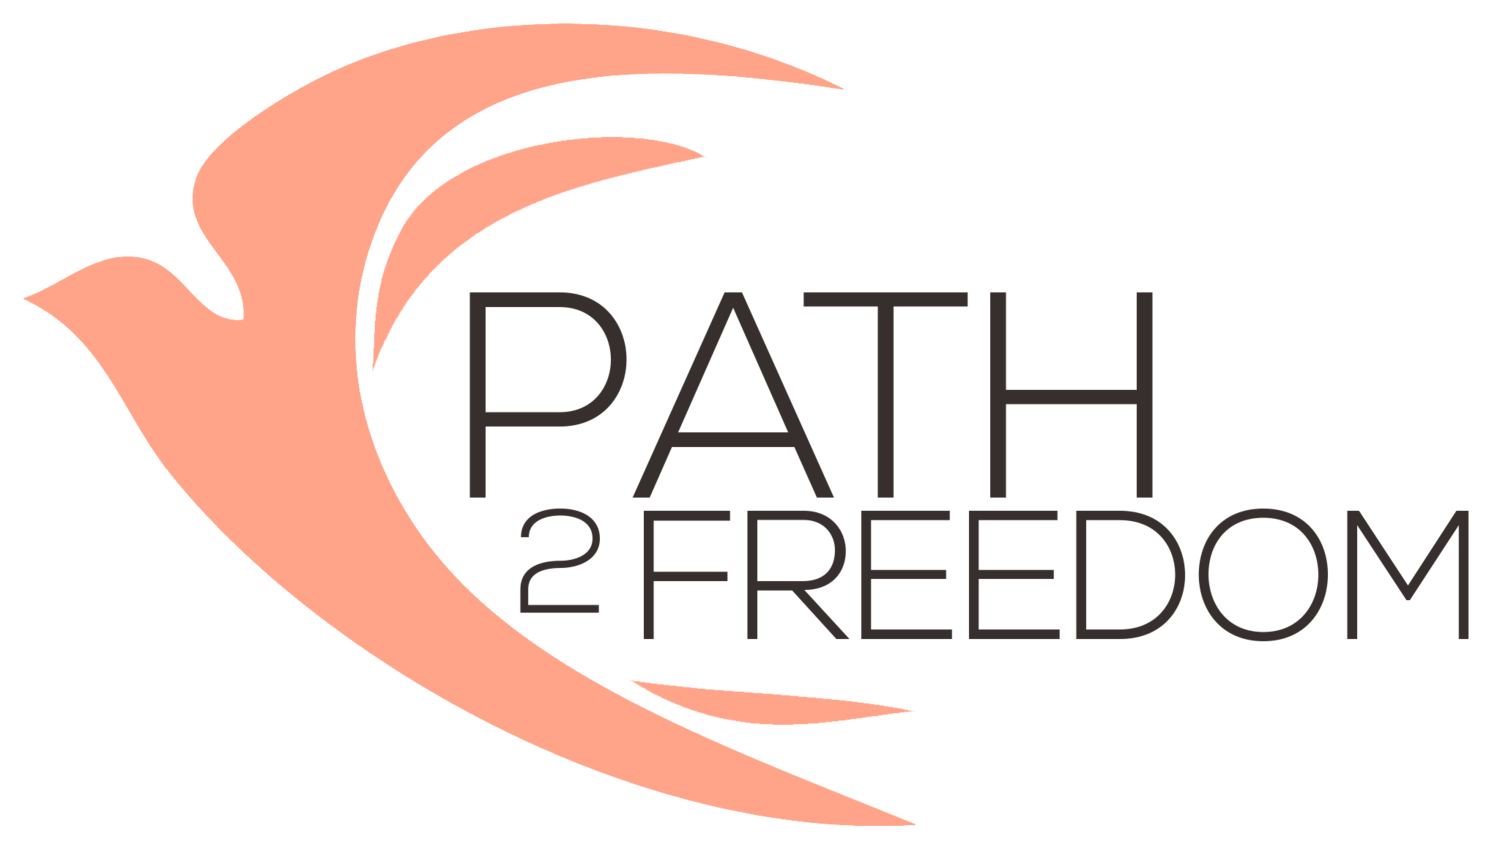 Former Mrs. U.S. of A, Kristen Weardon is once again joining Path2Freedom to Offer Hope to Minor Victims of Human Trafficking in SWFL at the 4th Annual Red Gala